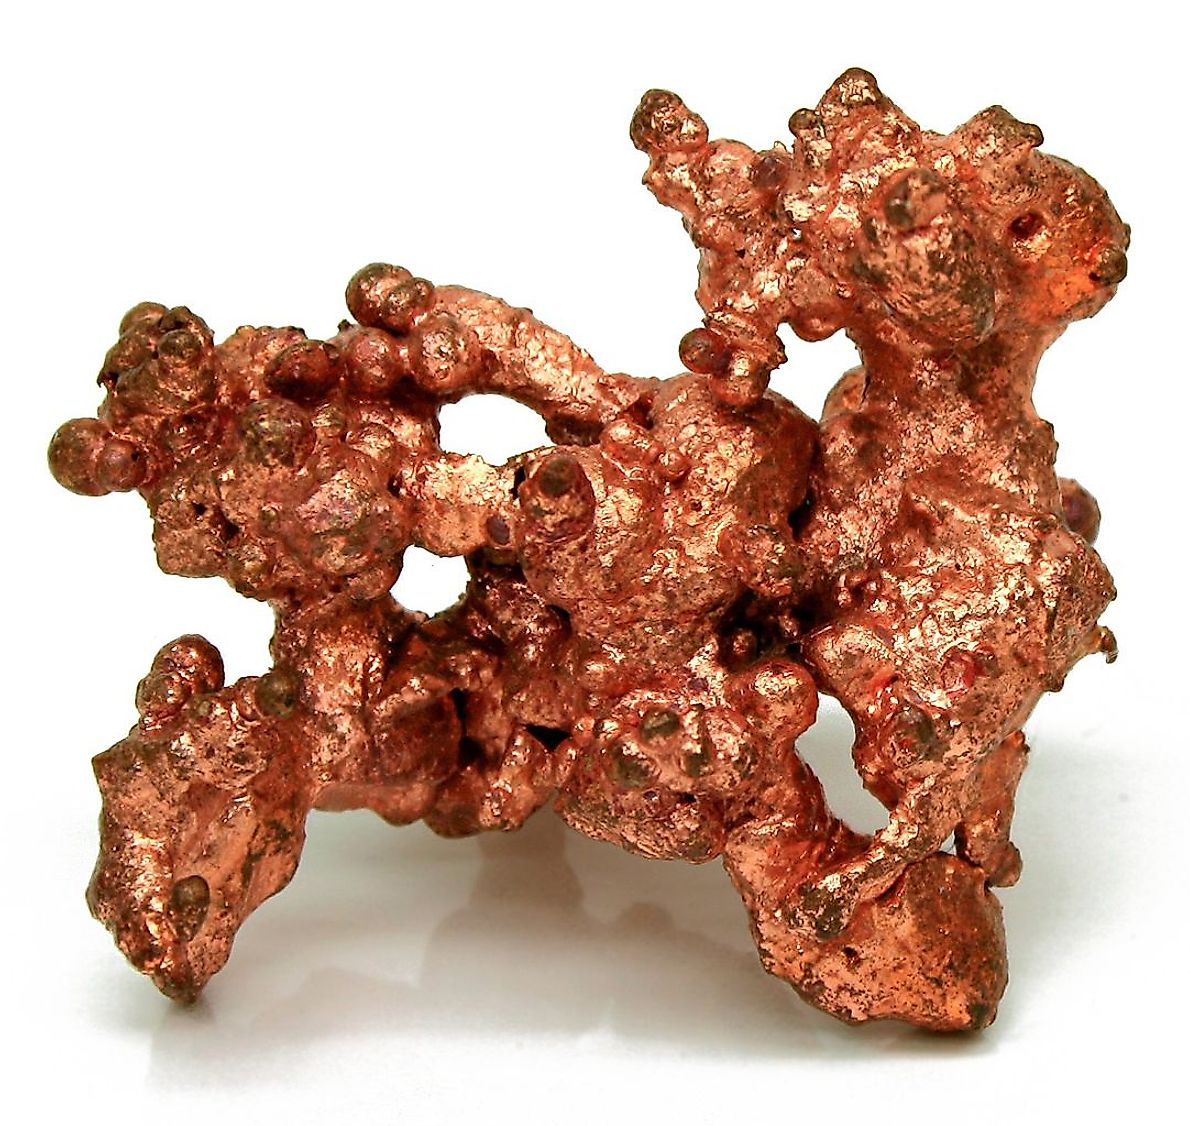 A Piece of native copper about 1 ½ inches (4 cm) in size.